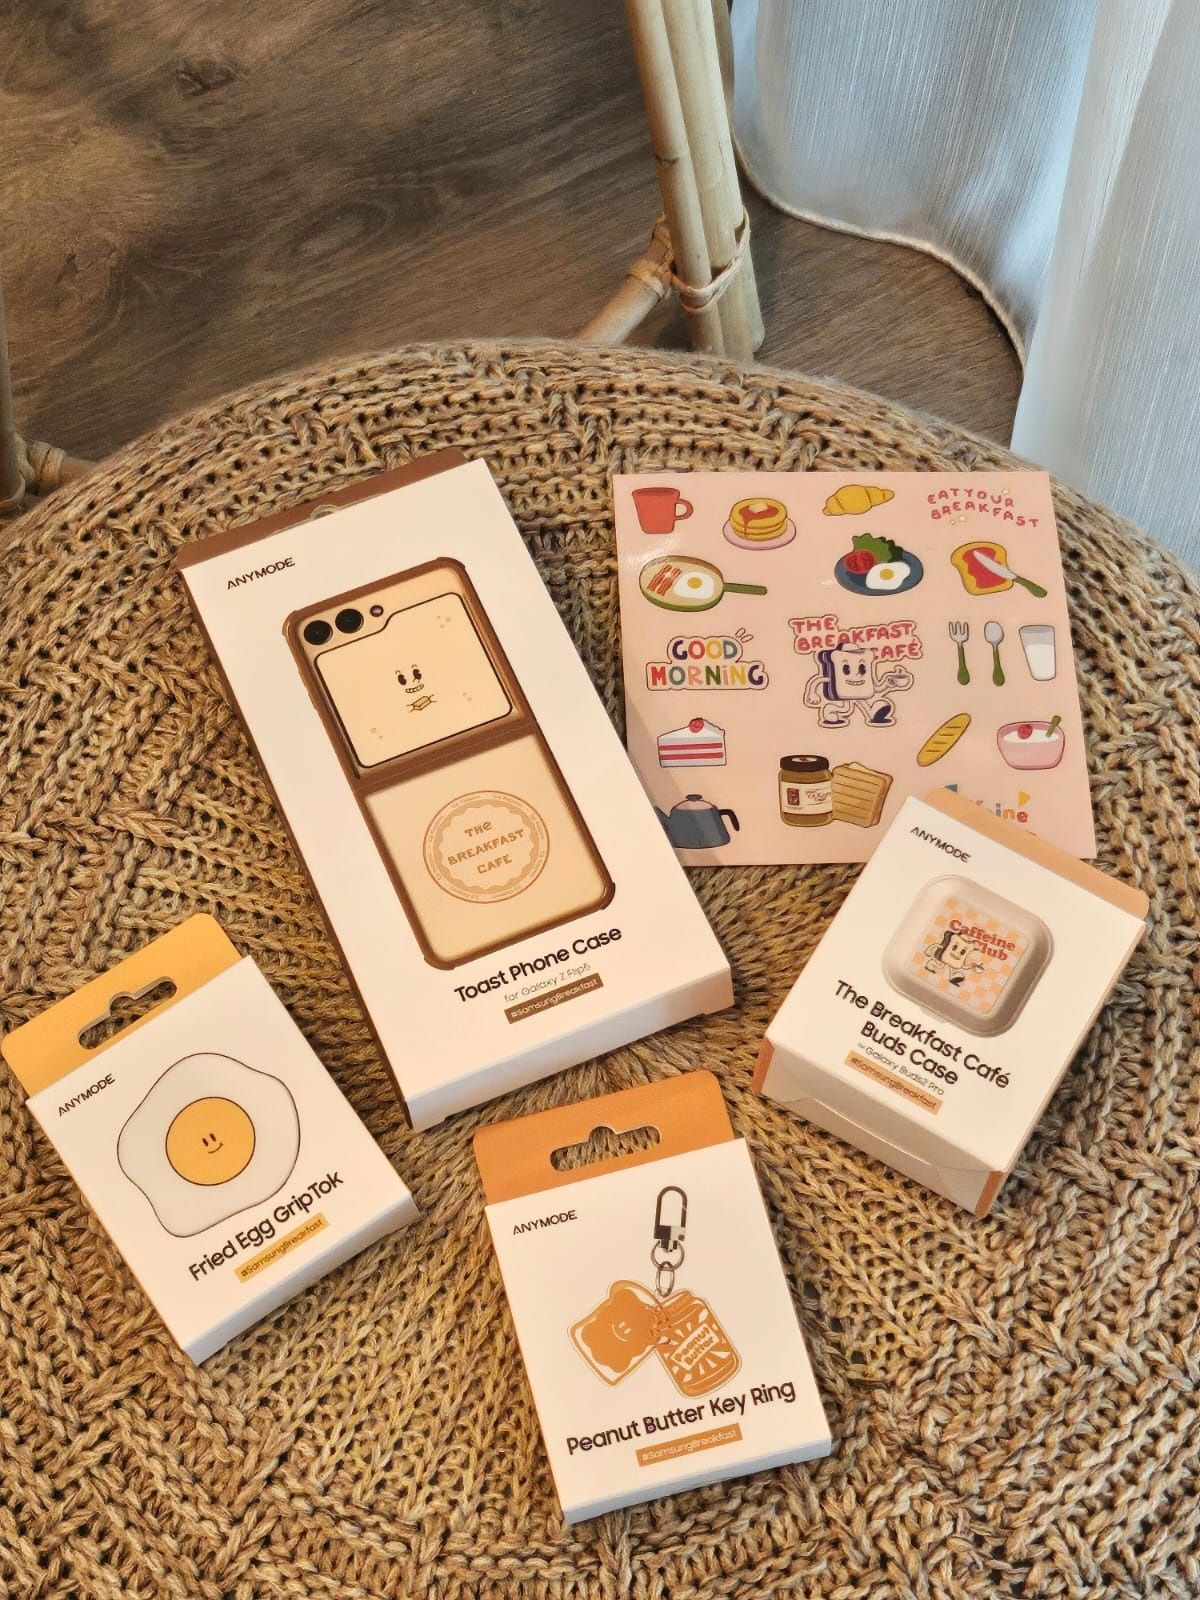 The Breakfast Cafe Accessories Collection - Samsung Members